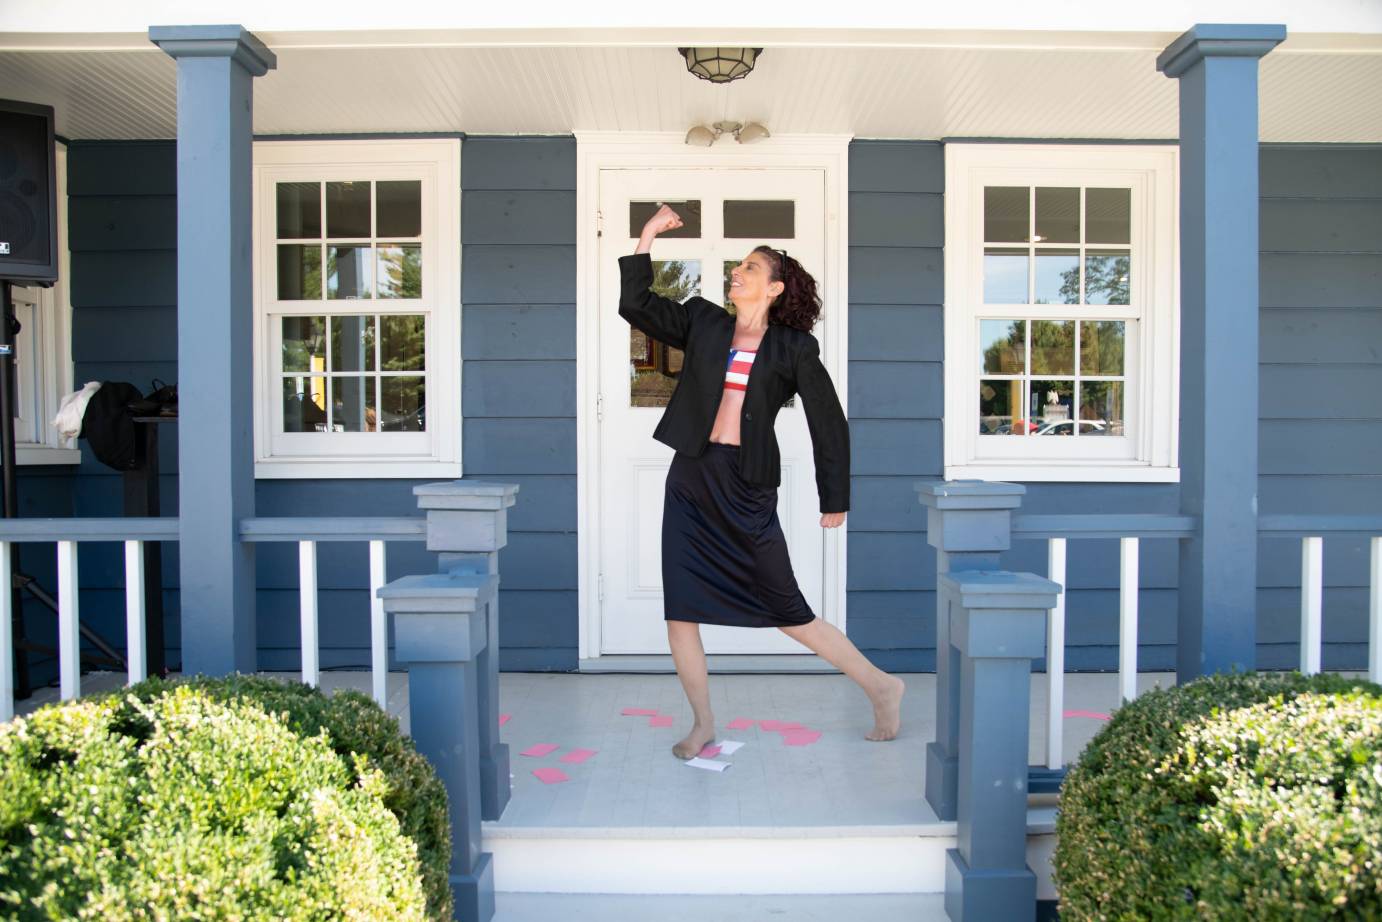 on the porch of a slate blue home with white trimmings a bare foot woman wearing a skirt suit over an American flag designed tube top, strikes a pose showing her strength, scattered around her feet are various index cards in pink and white